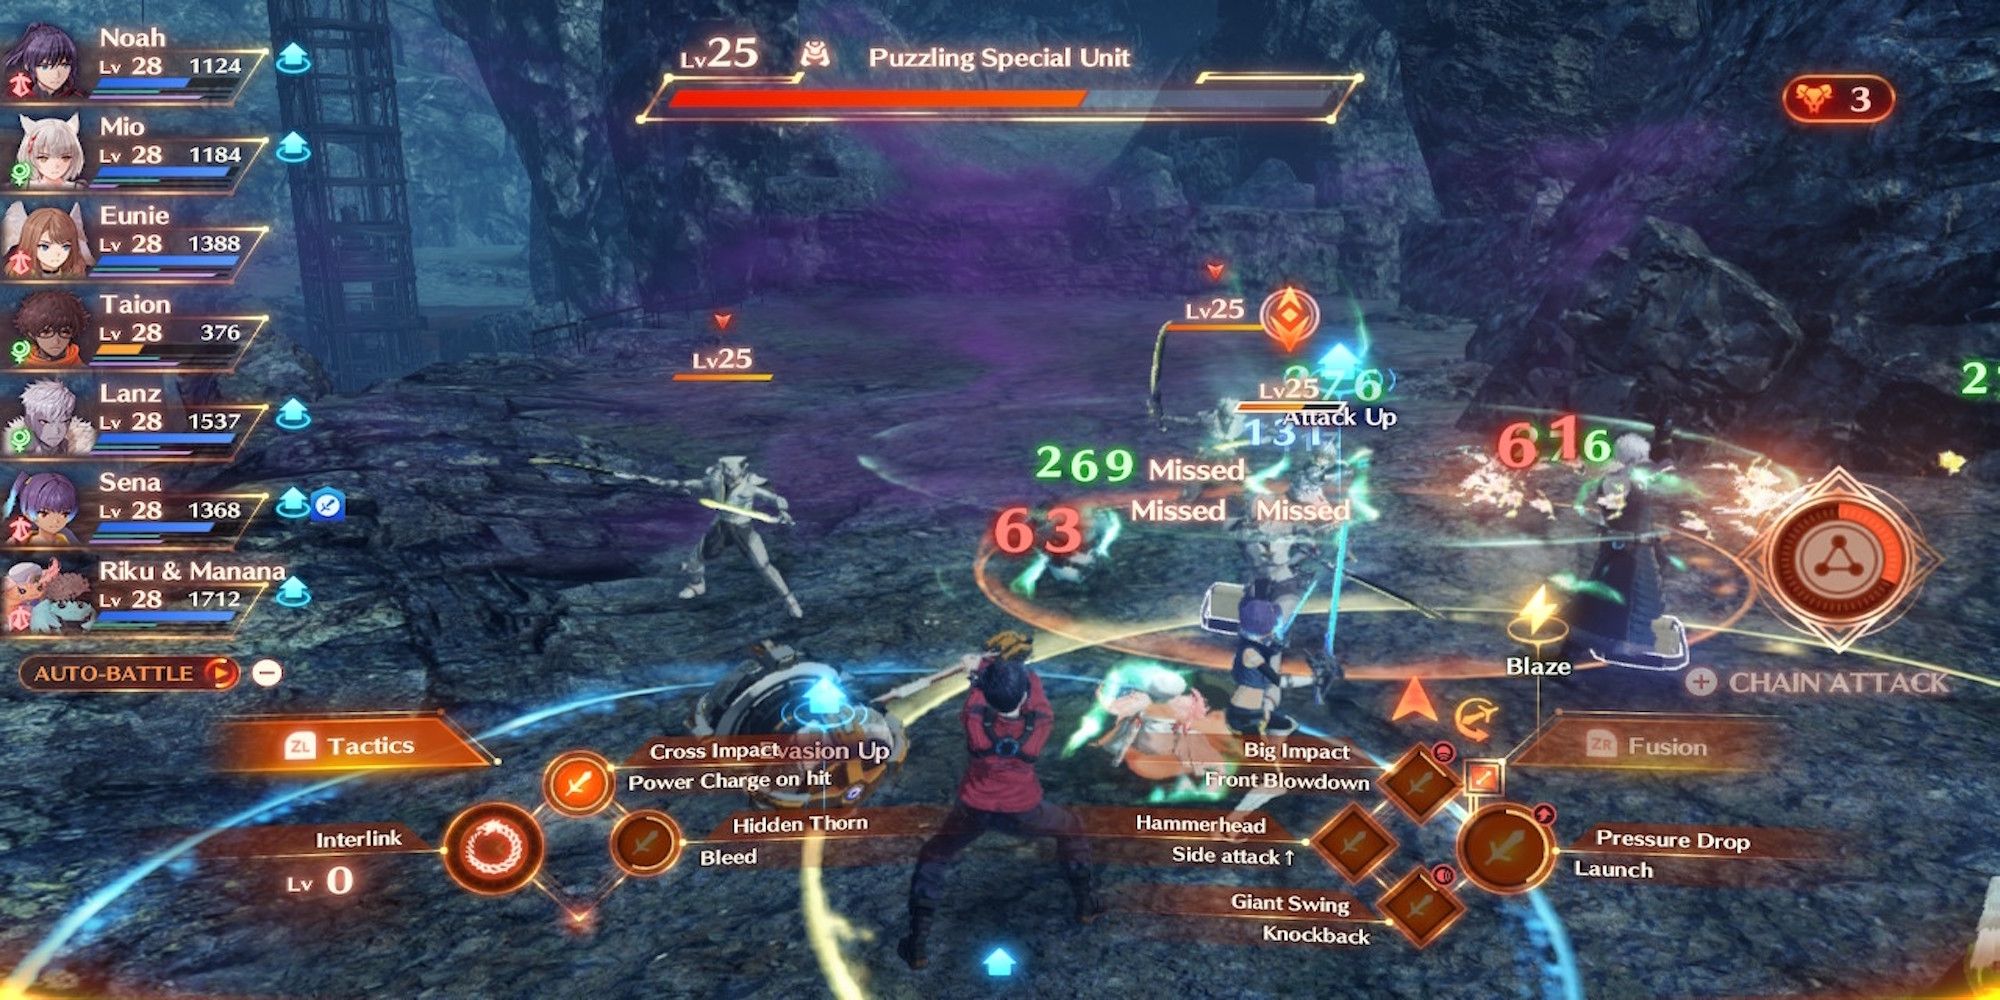 Fighting enemies in Xenoblade Chronicles 3